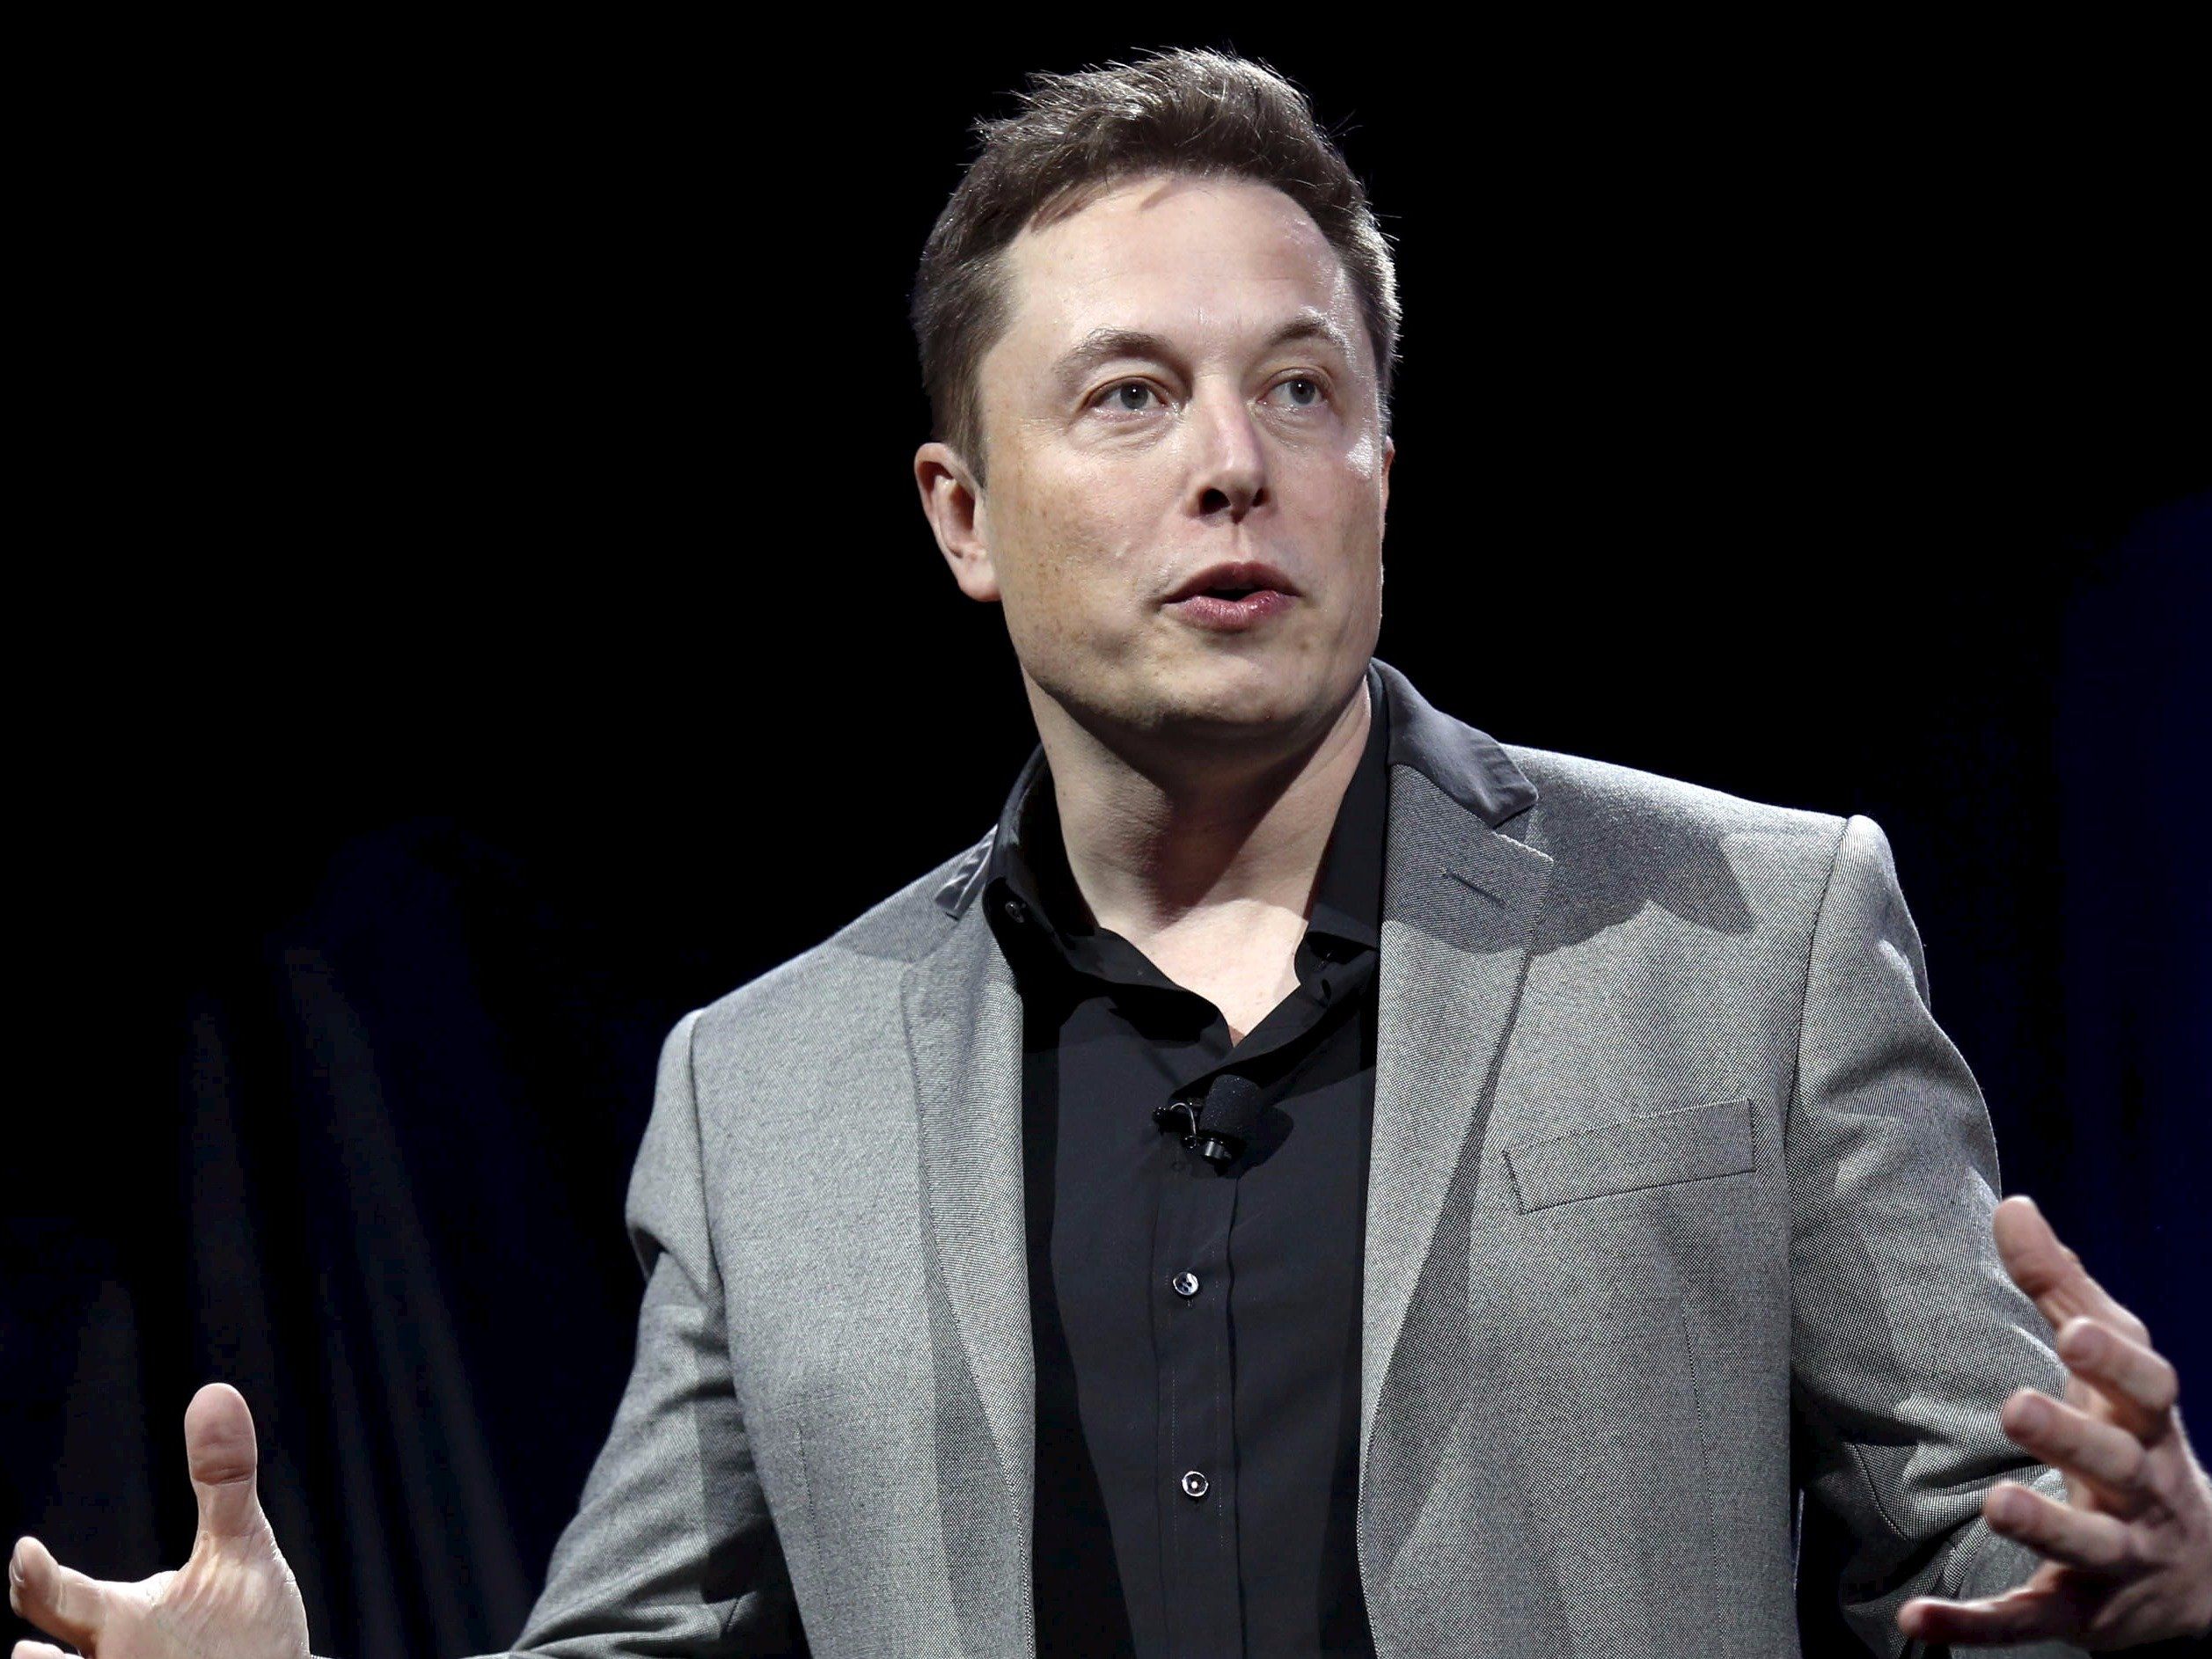 Elon Musk just announced a new artificial intelligence research company